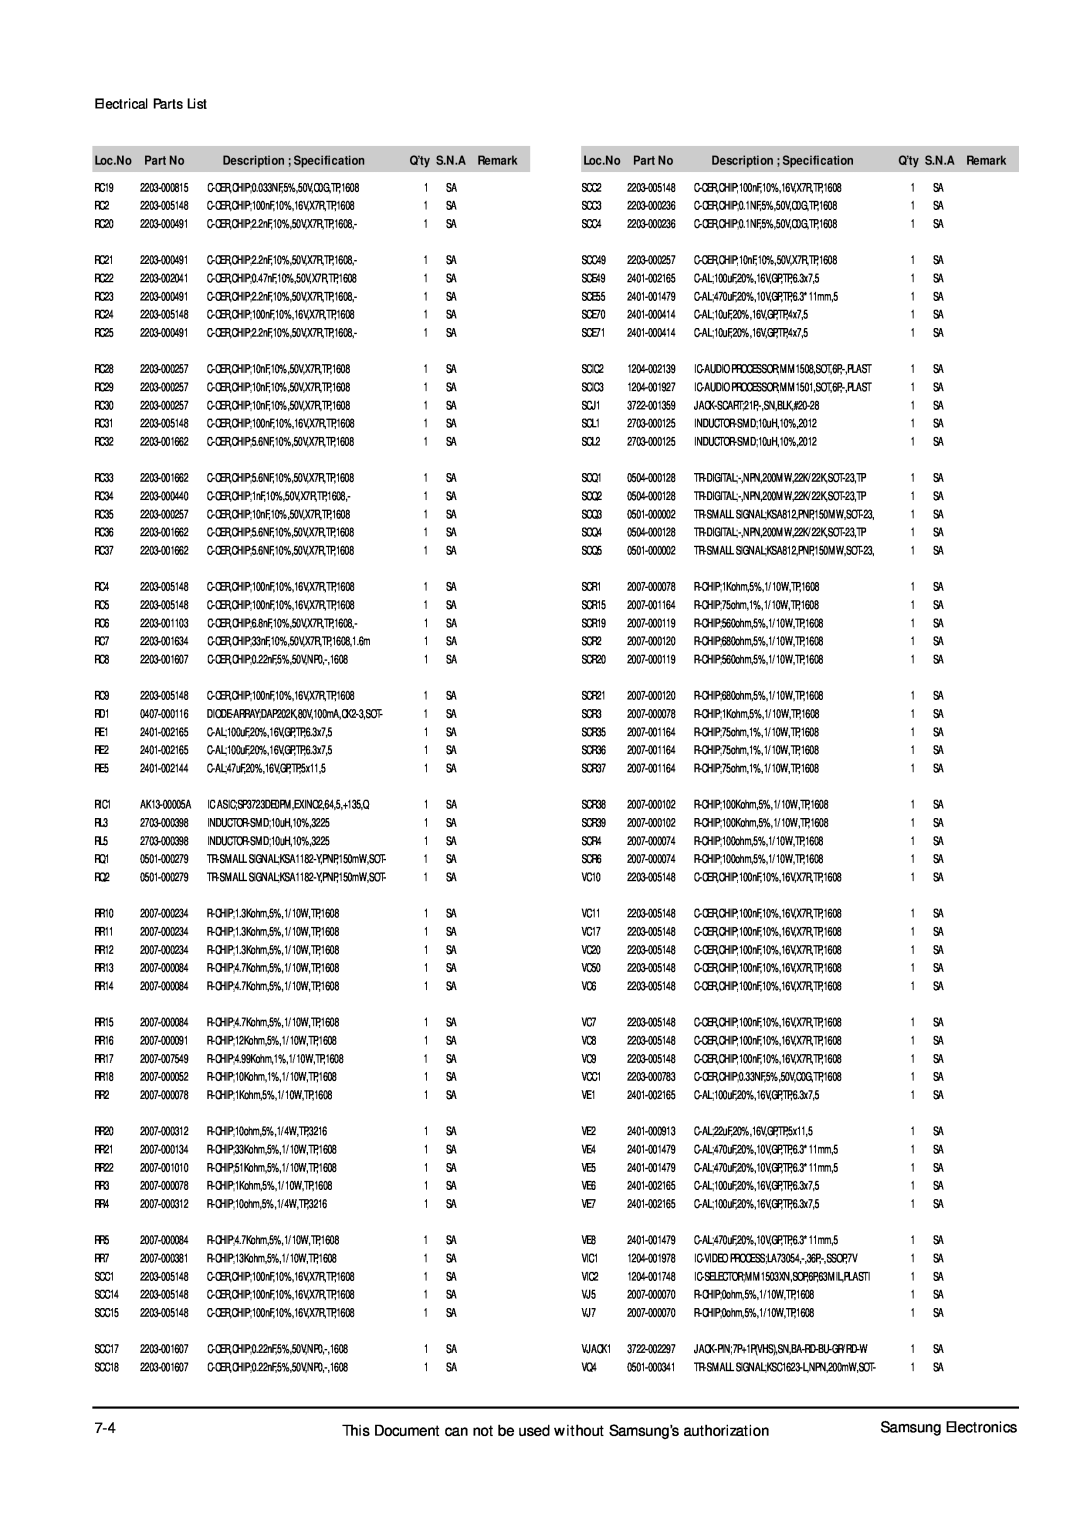 Samsung DVD-P355B/XEU, DVD-P355B/XEH This Document can not be used without Samsung’s authorization, Electrical Parts List 